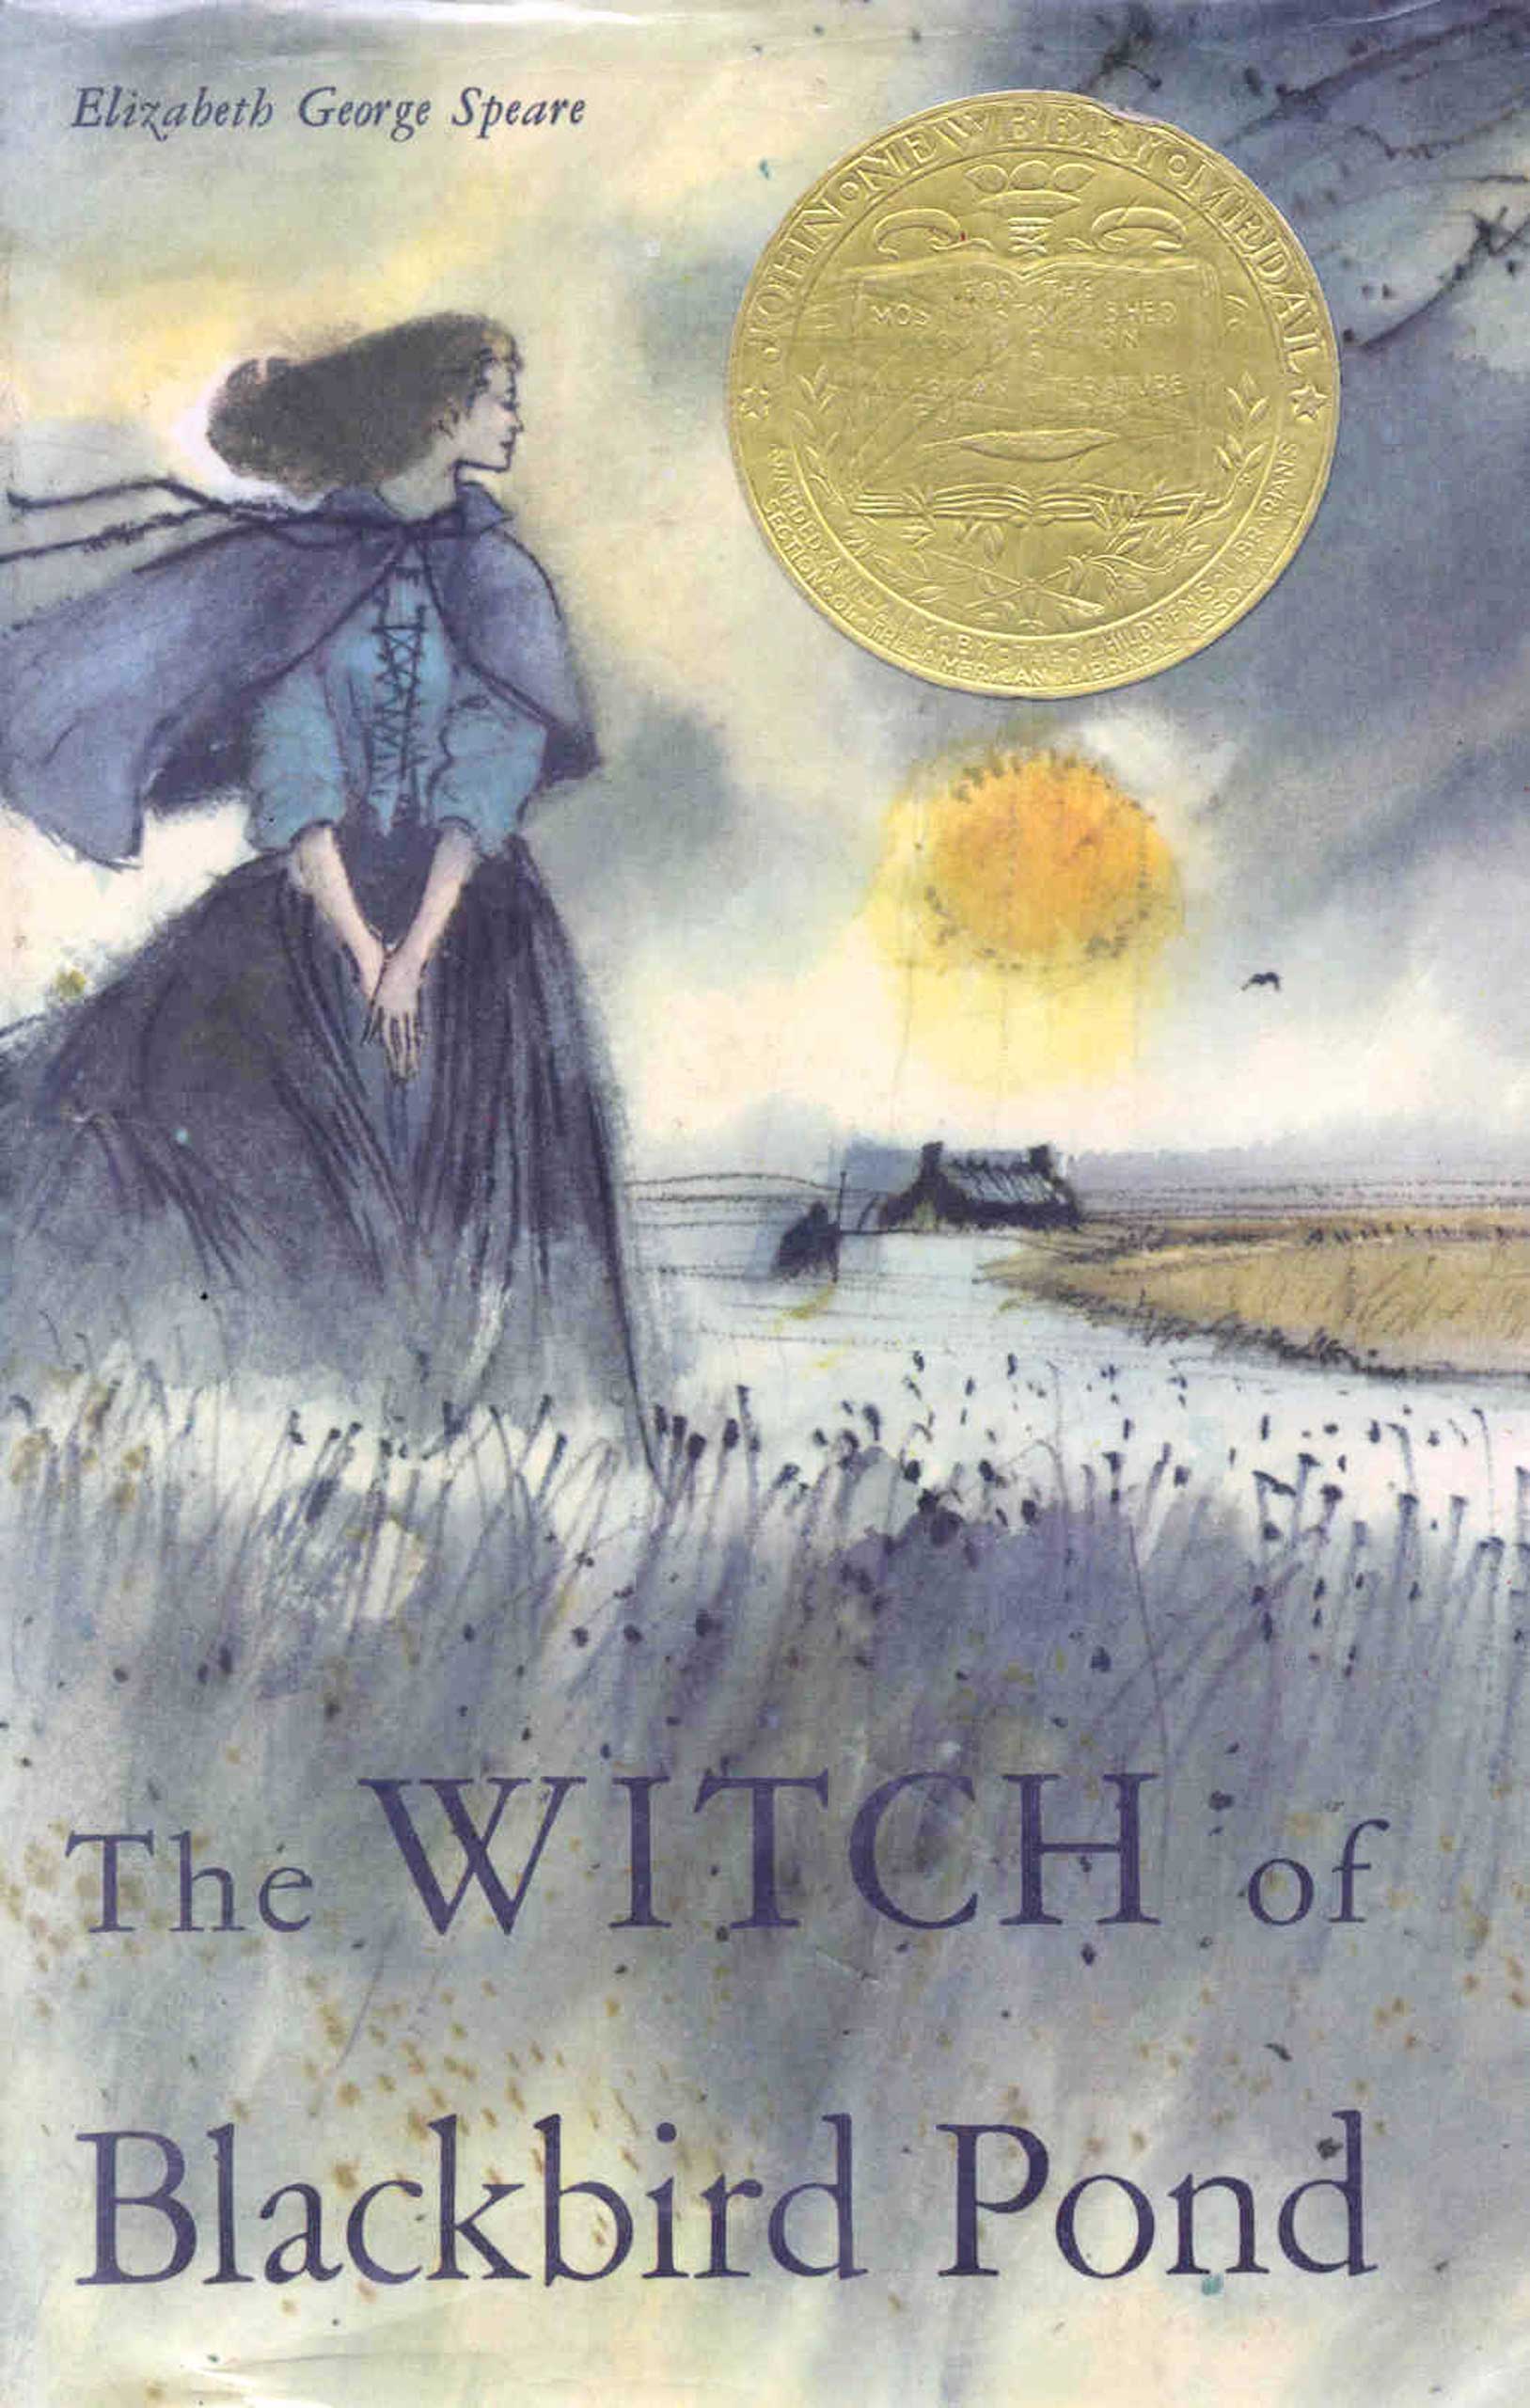 The Witch of Blackbird Pond, by Elizabeth George Speare.
                              
                              
                              
                              The ever spirited and goodhearted Kit Tyler is sent to colonial Connecticut in 1687, where her manners—and her friendship with an old woman known as the Witch of Blackbird Pond—make her suspicious to the townspeople.
                              
                              
                              
                              Buy now: The Witch of Blackbird Pond